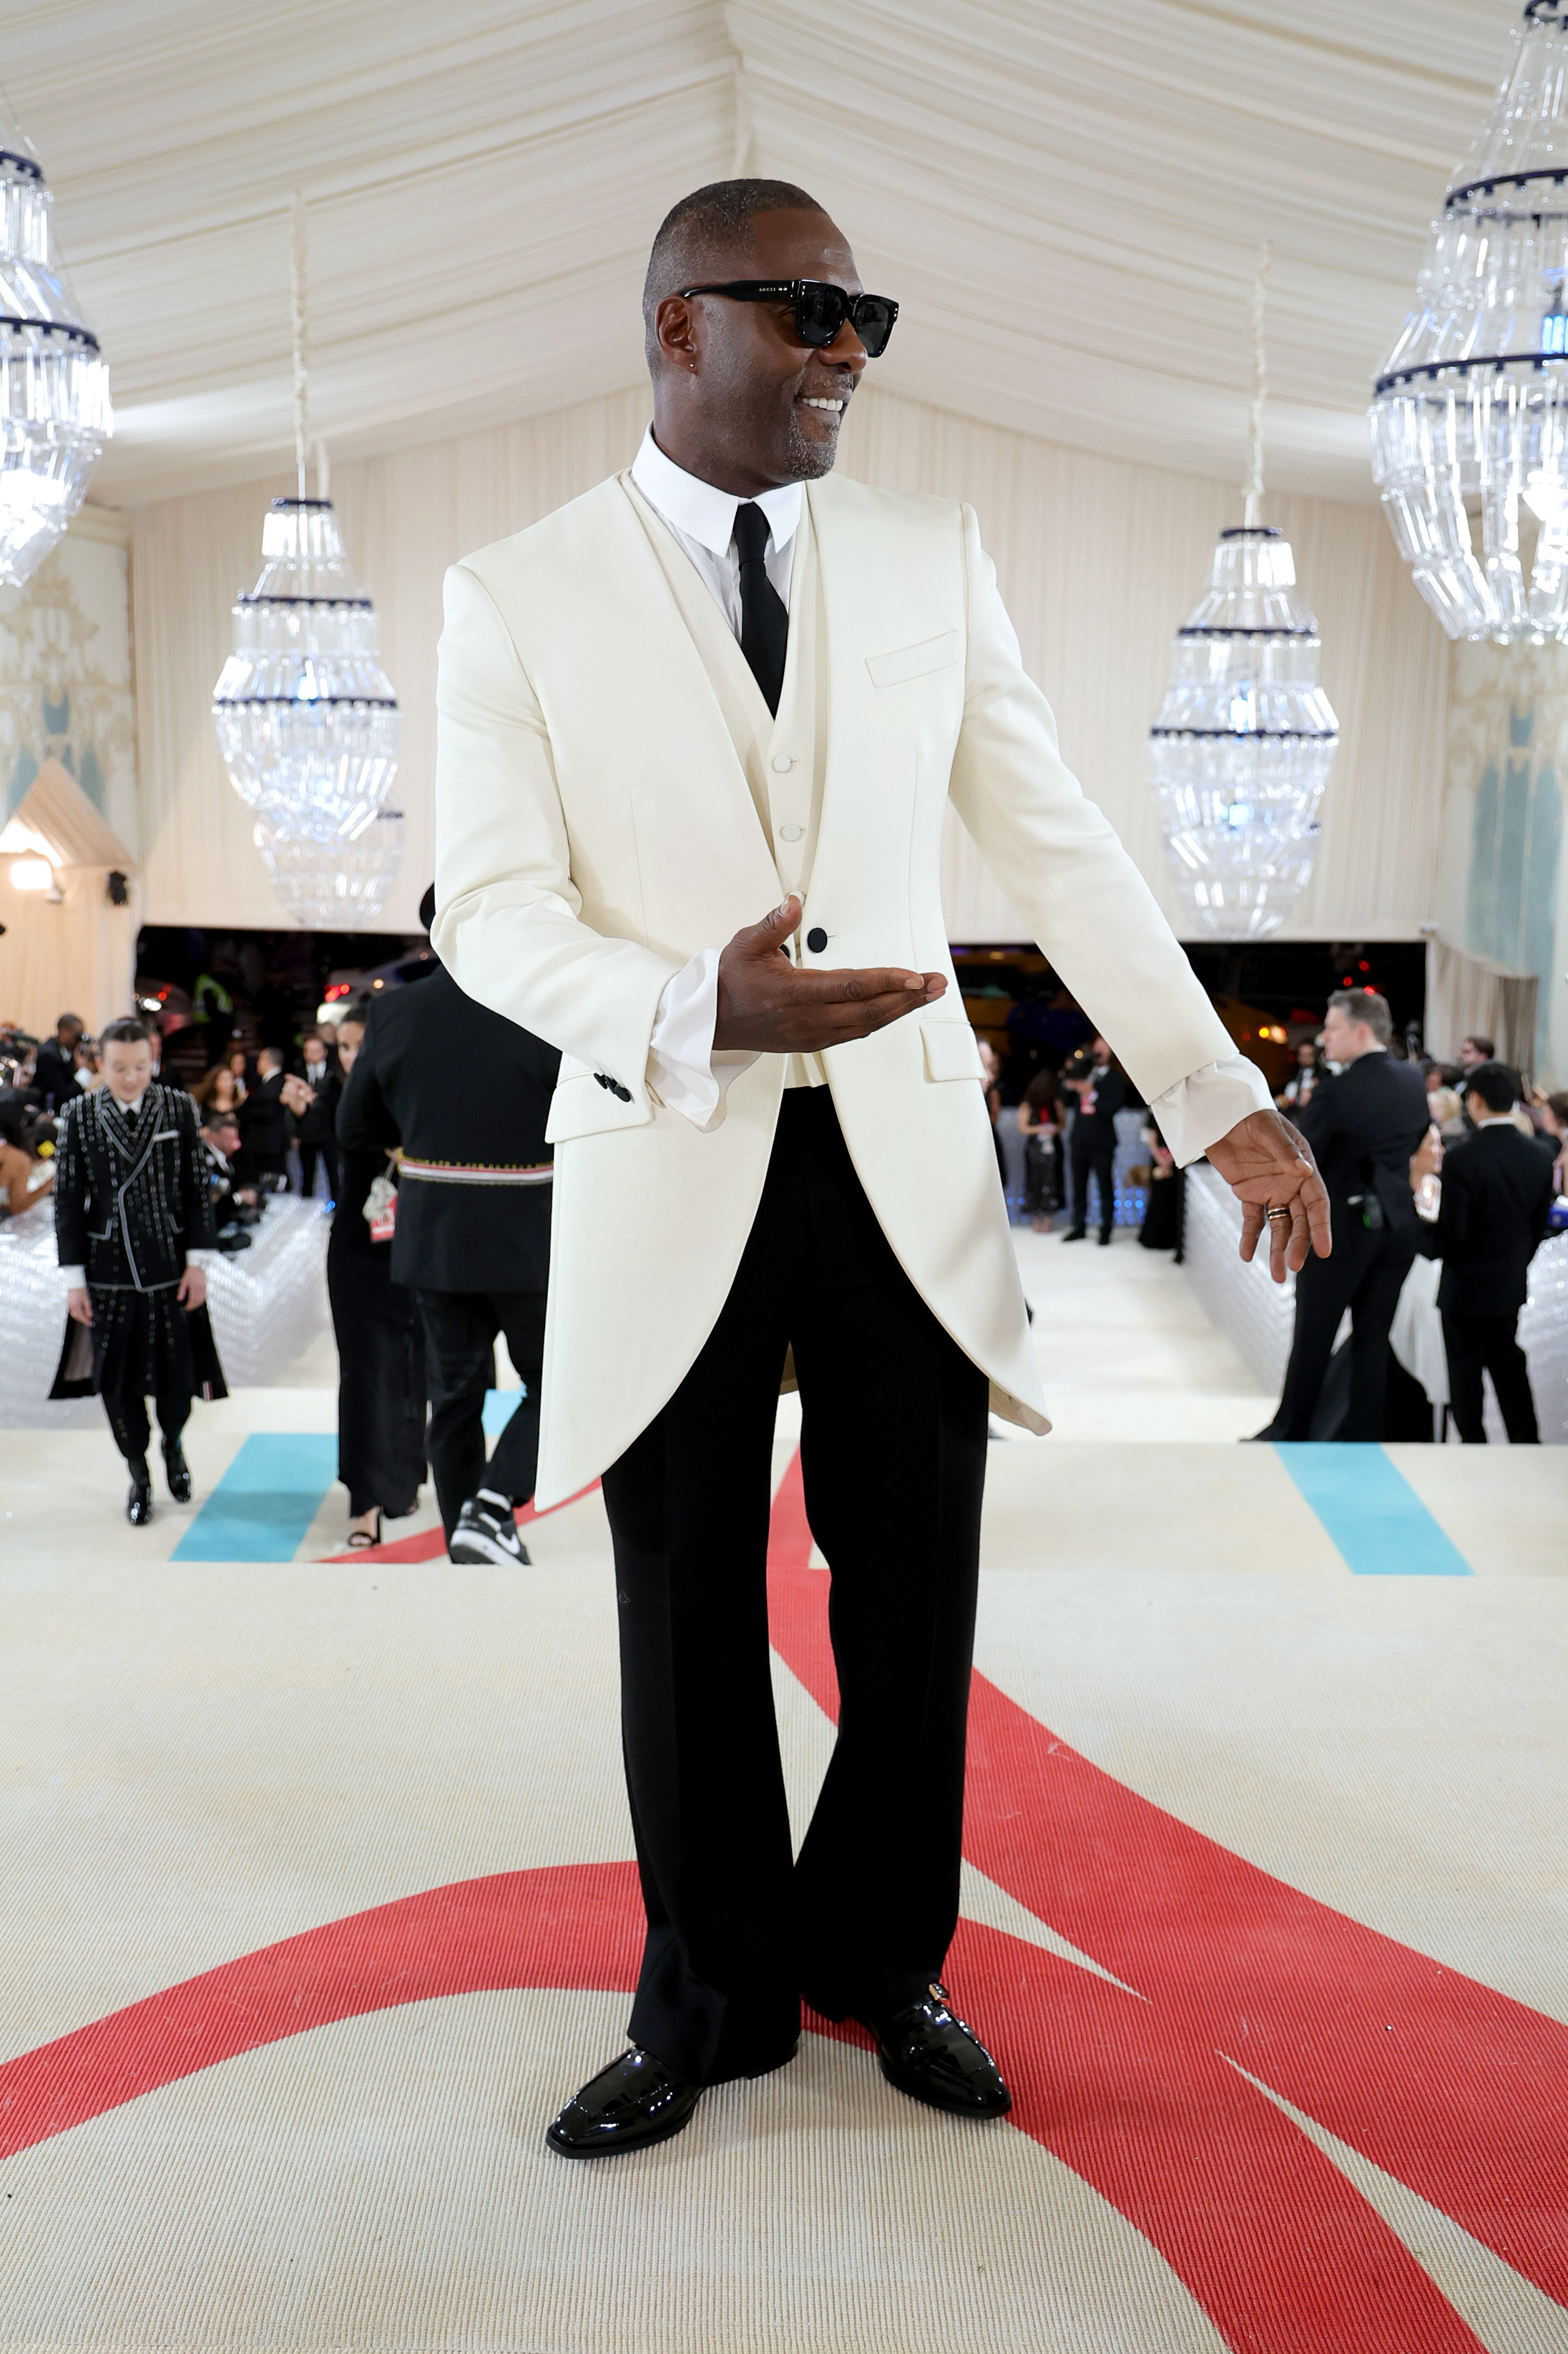 Man in a white tuxedo with black lapels and sunglasses on a gala event carpet